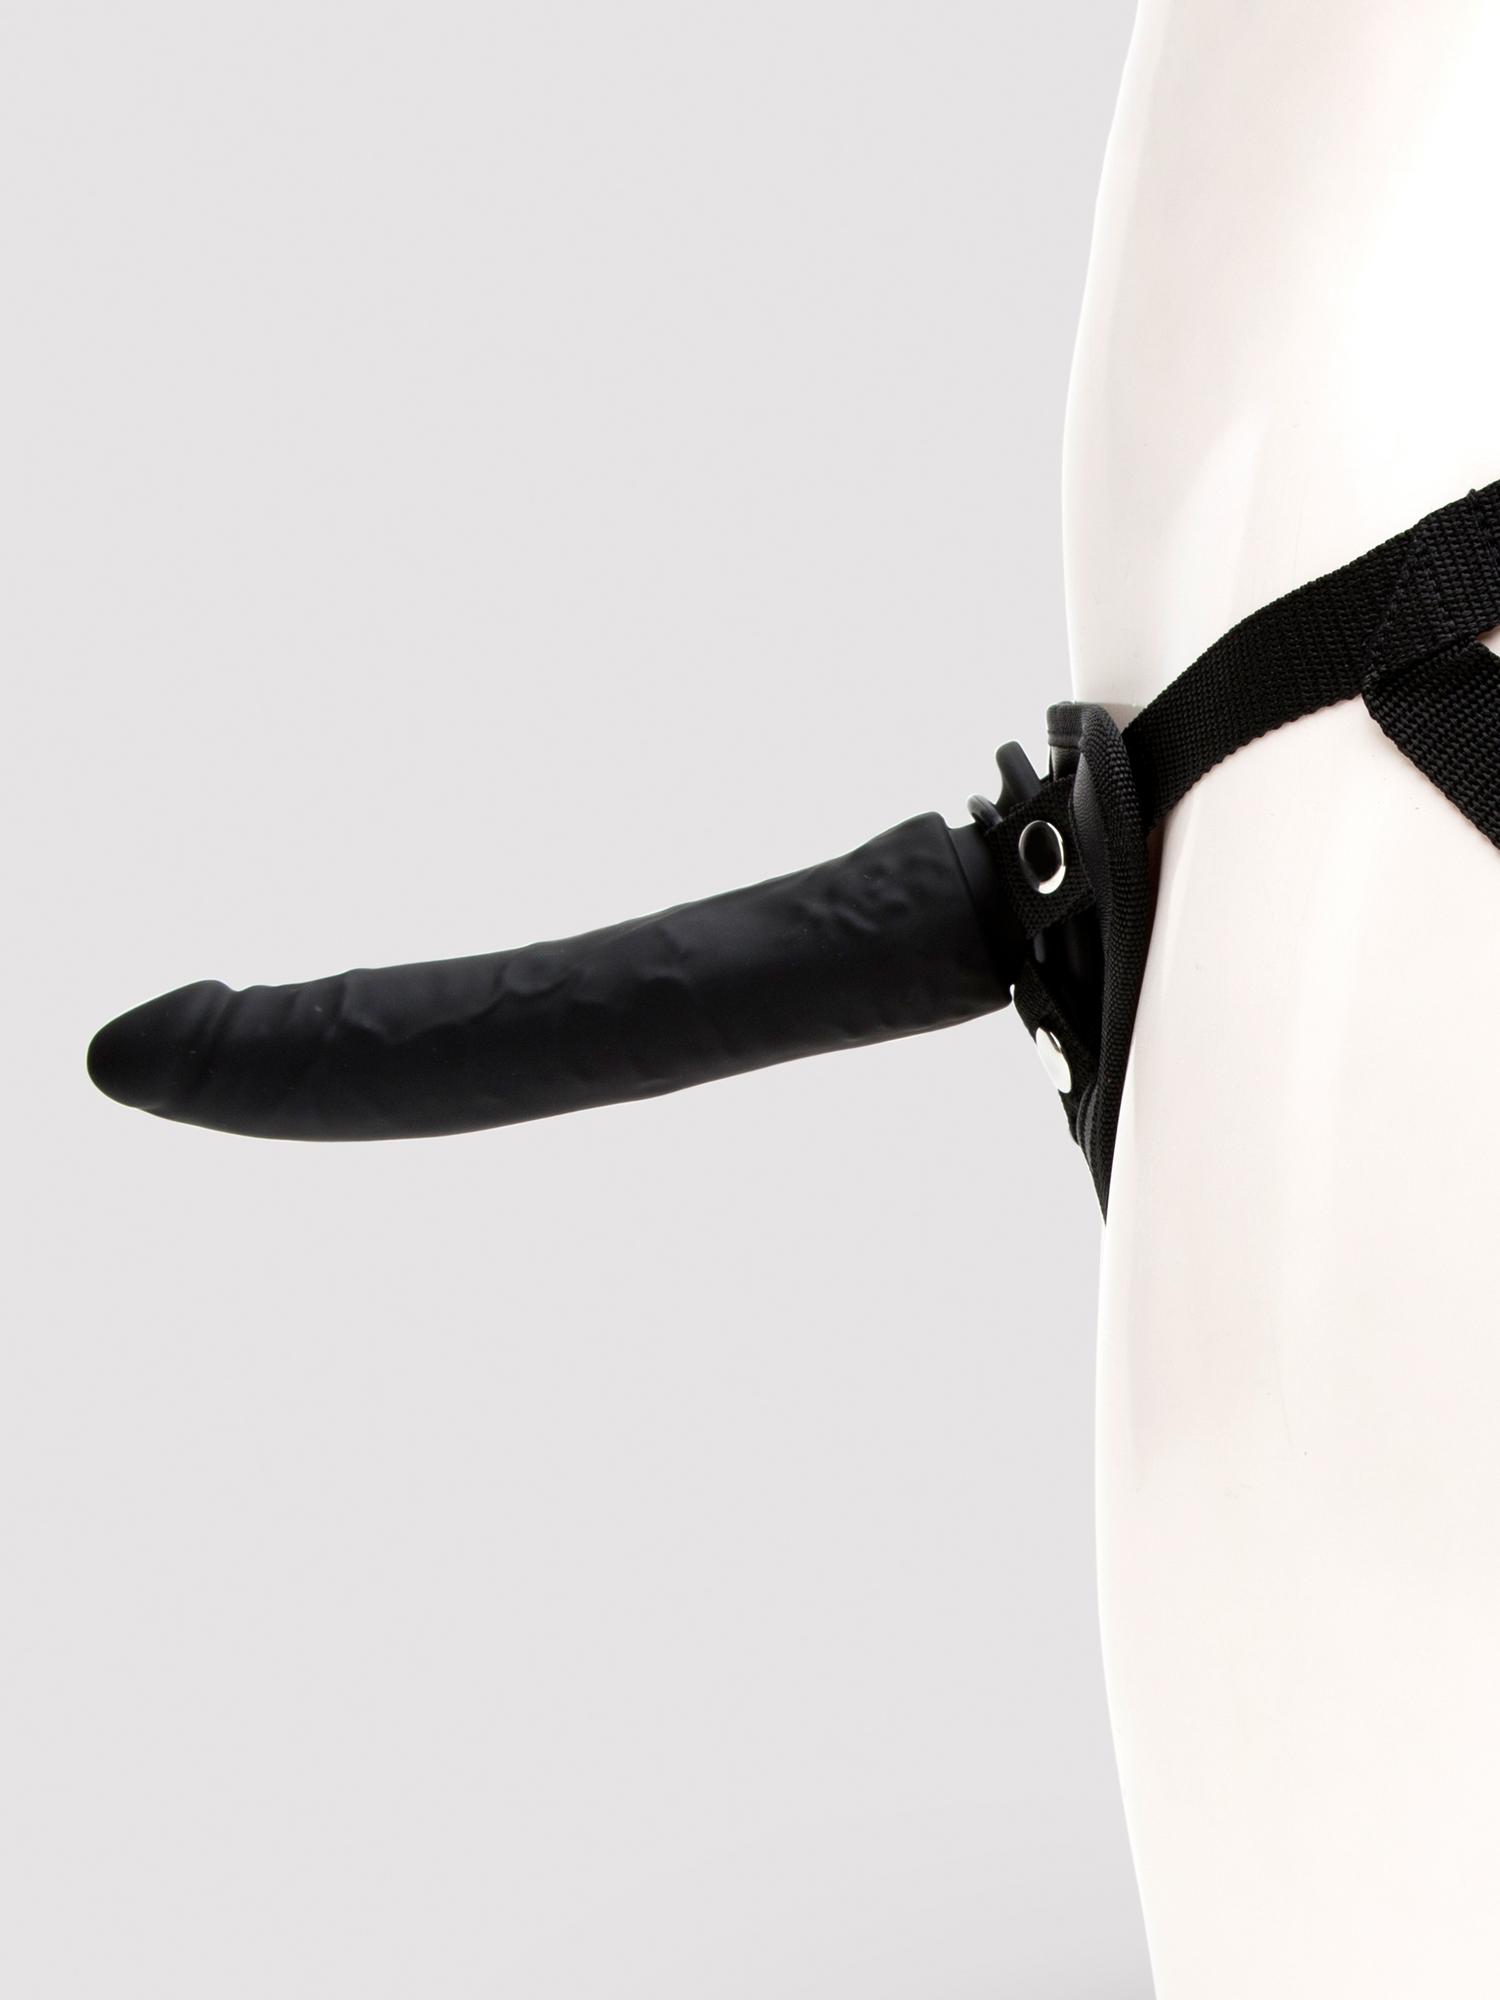  Lovehoney Deluxe Strap-On Harness Kit with 2 Silicone Dildos . Slide 4